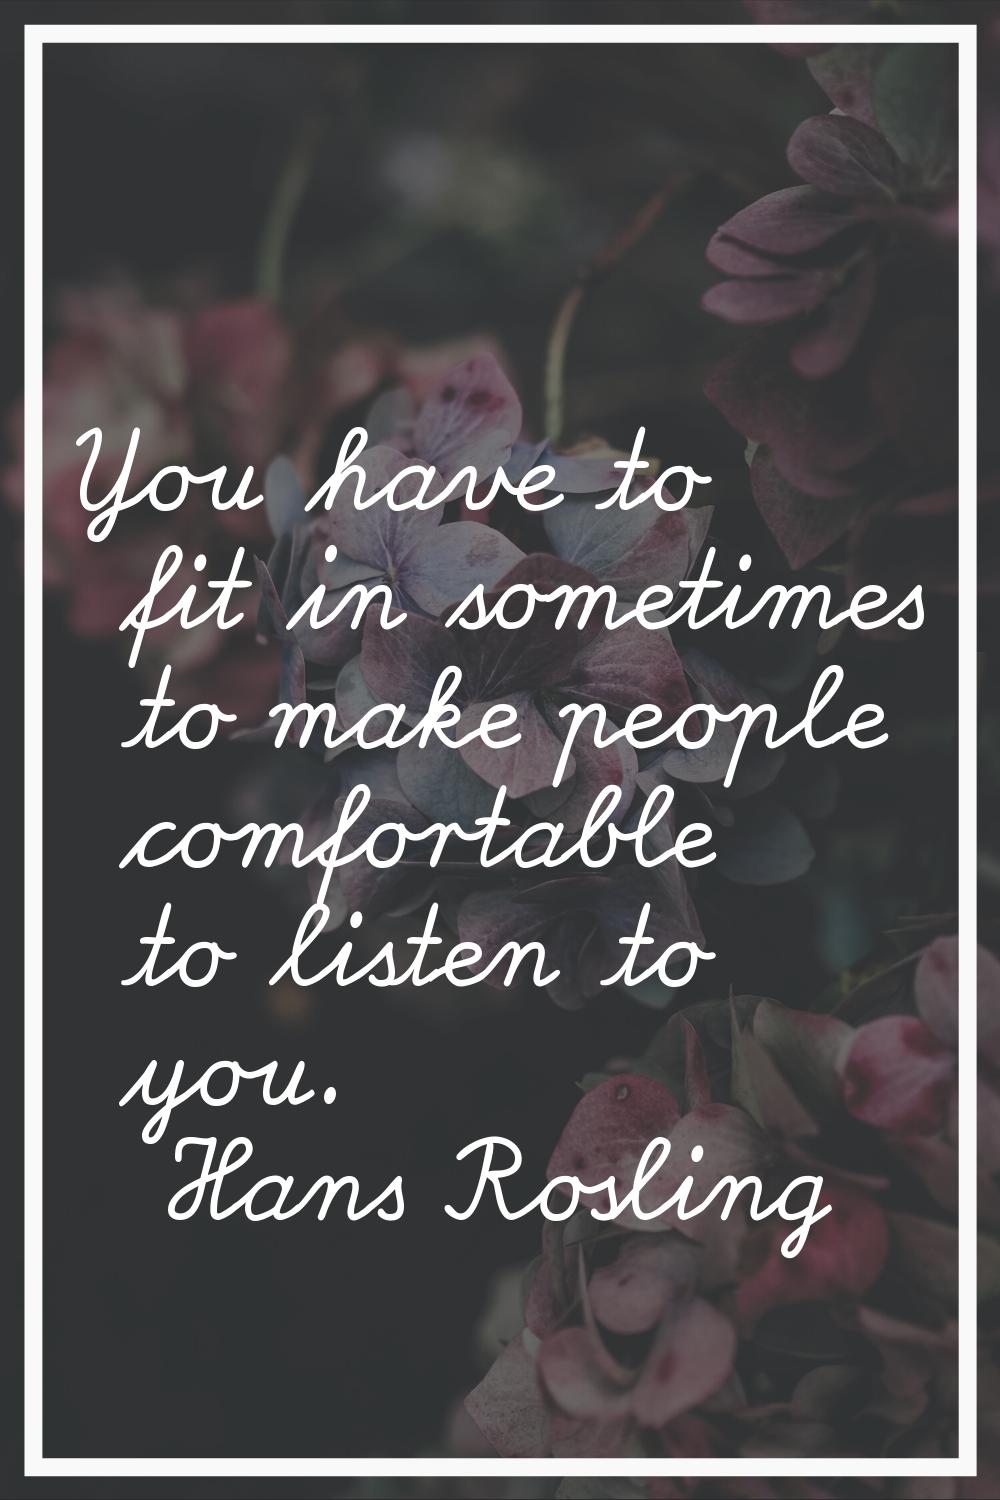 You have to fit in sometimes to make people comfortable to listen to you.